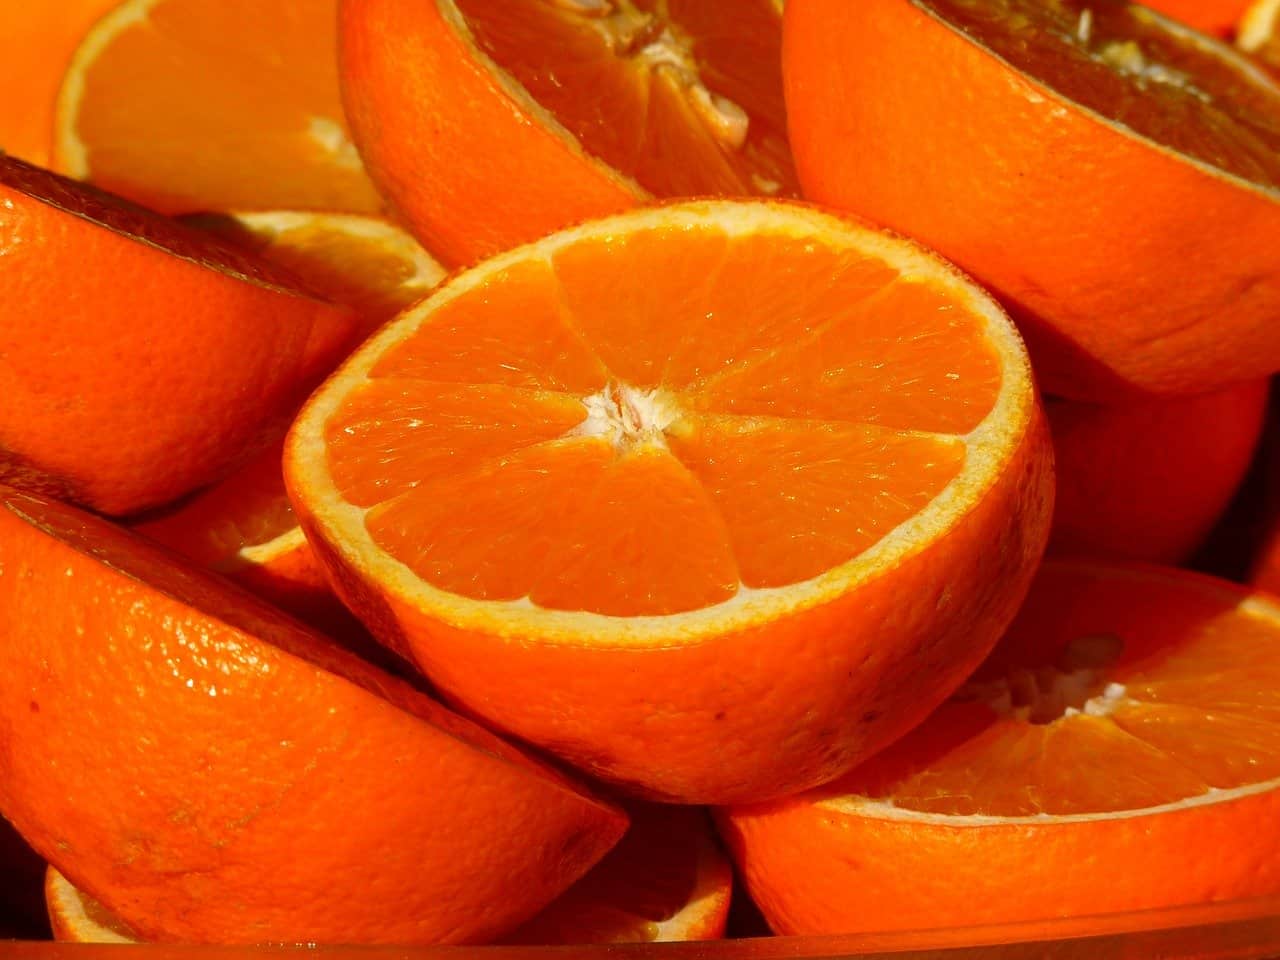 These fruits help fight cellulite!